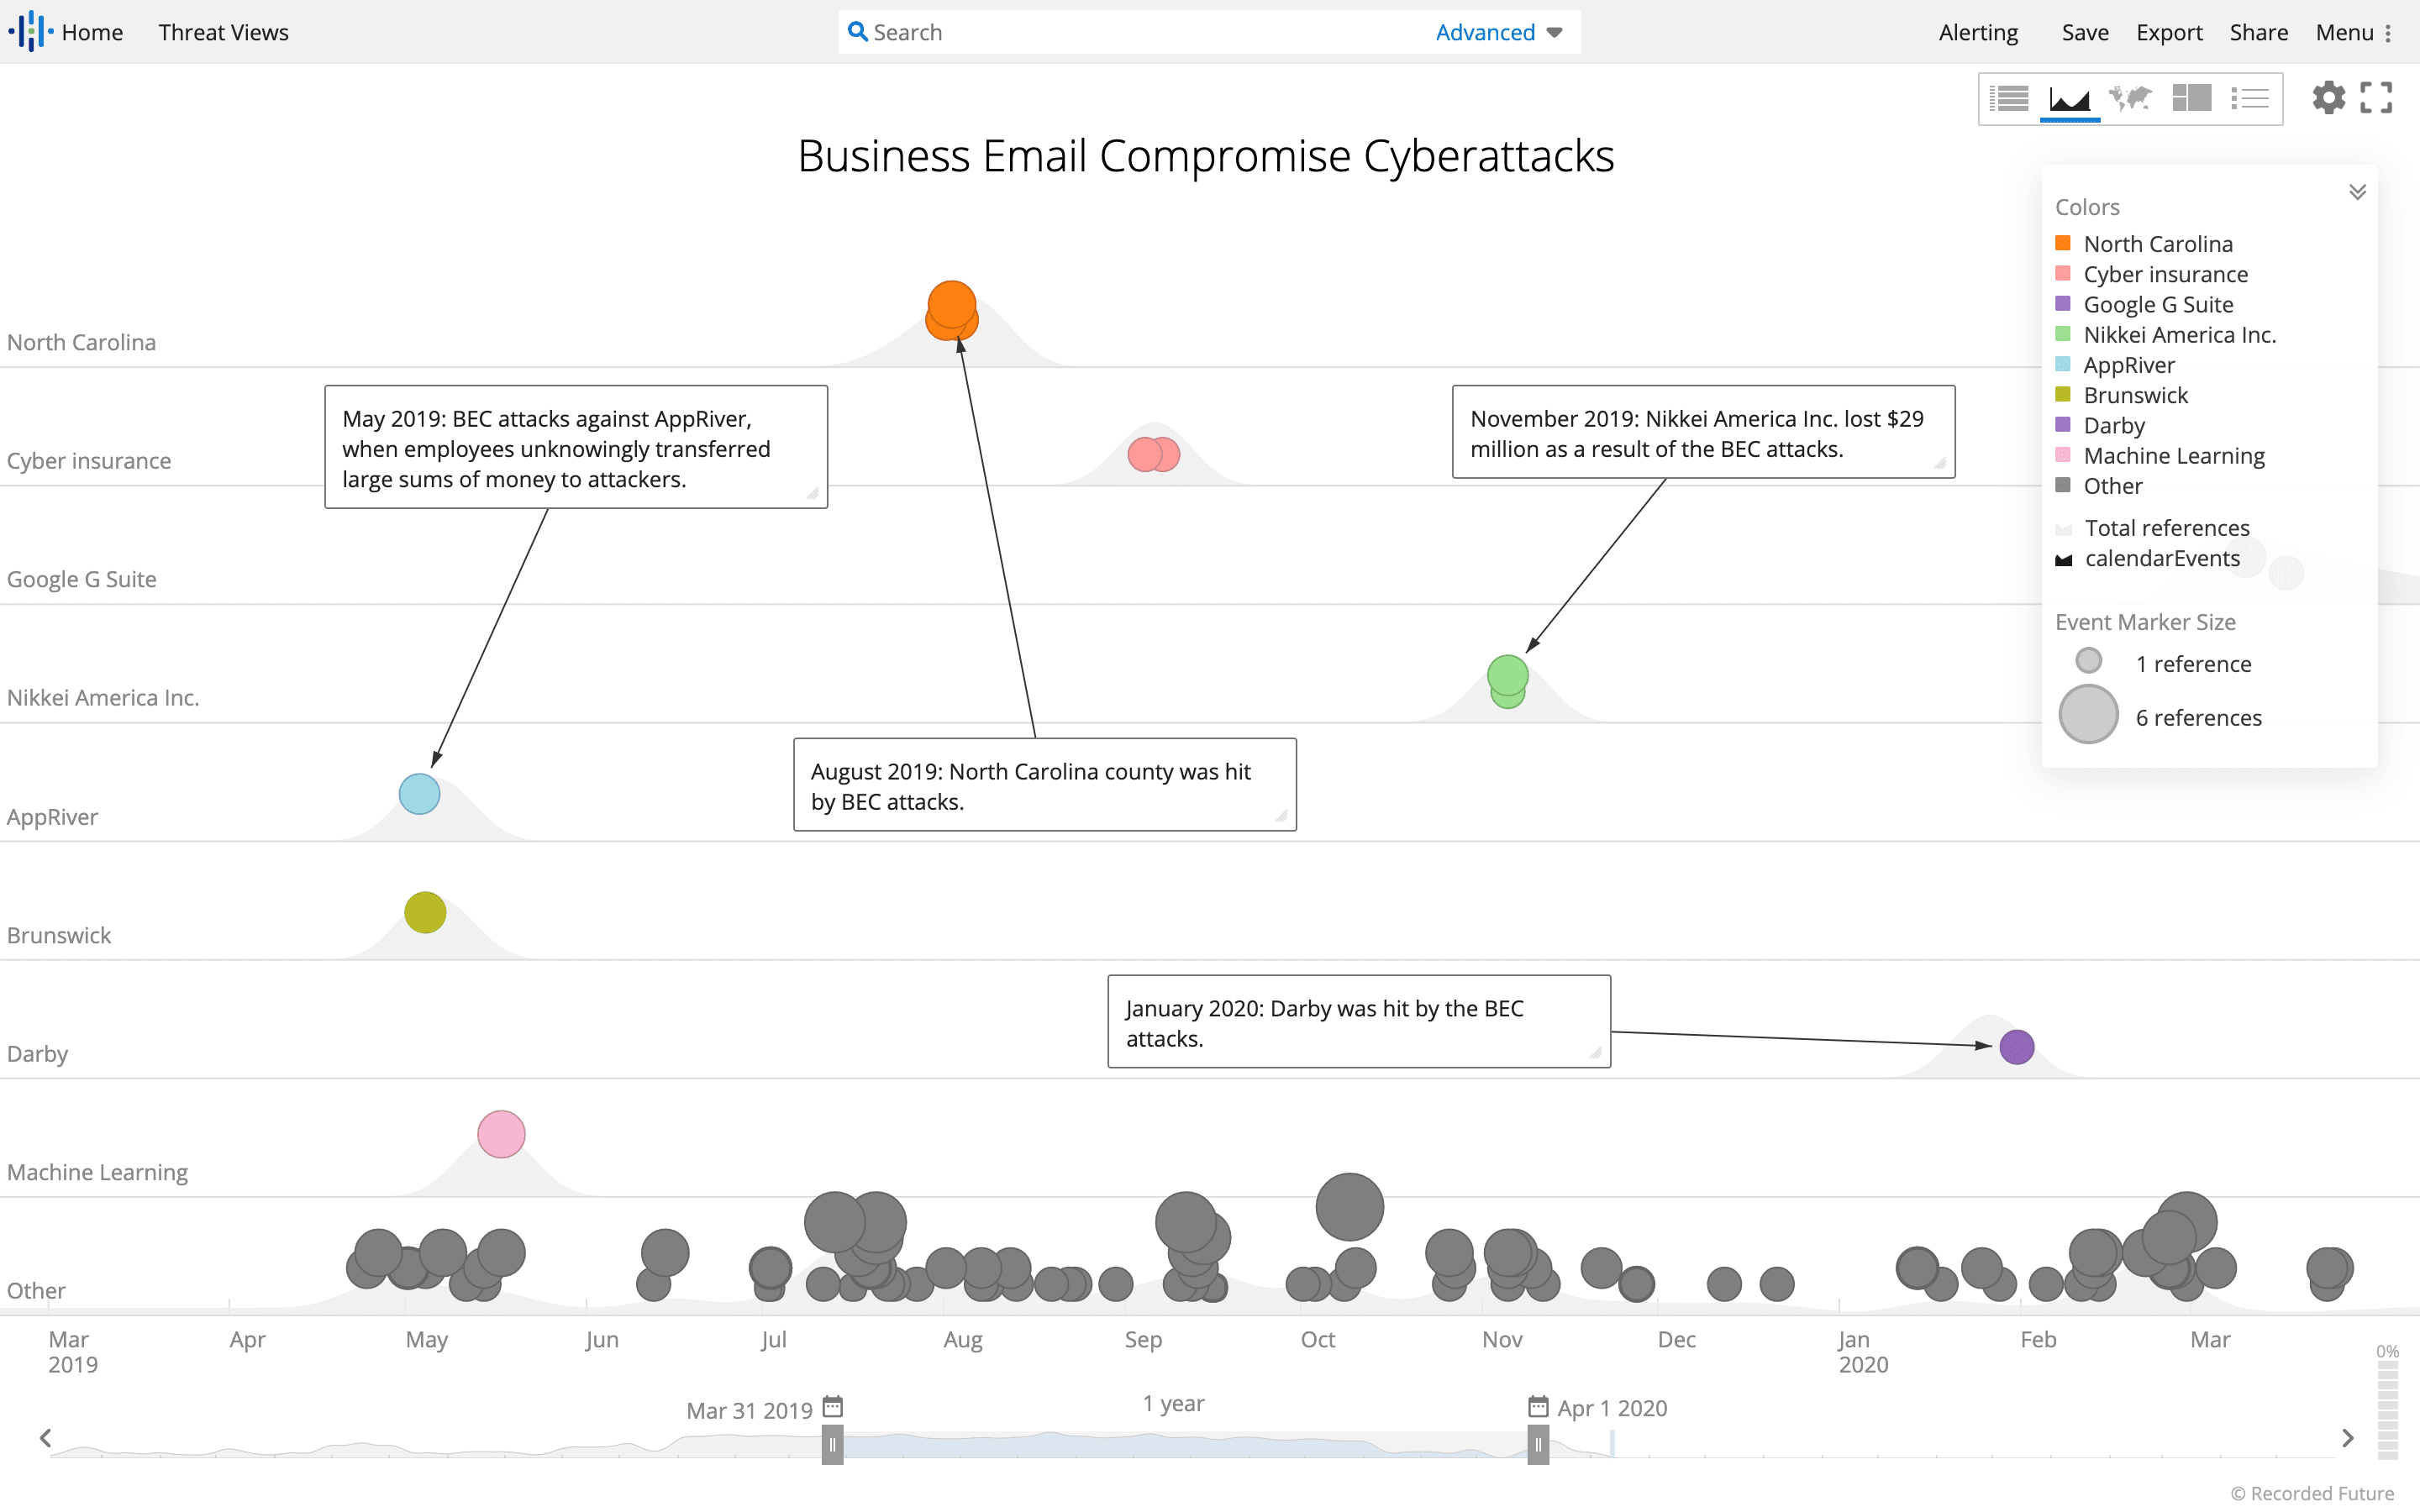 database-breaches-analysis-1-1.png